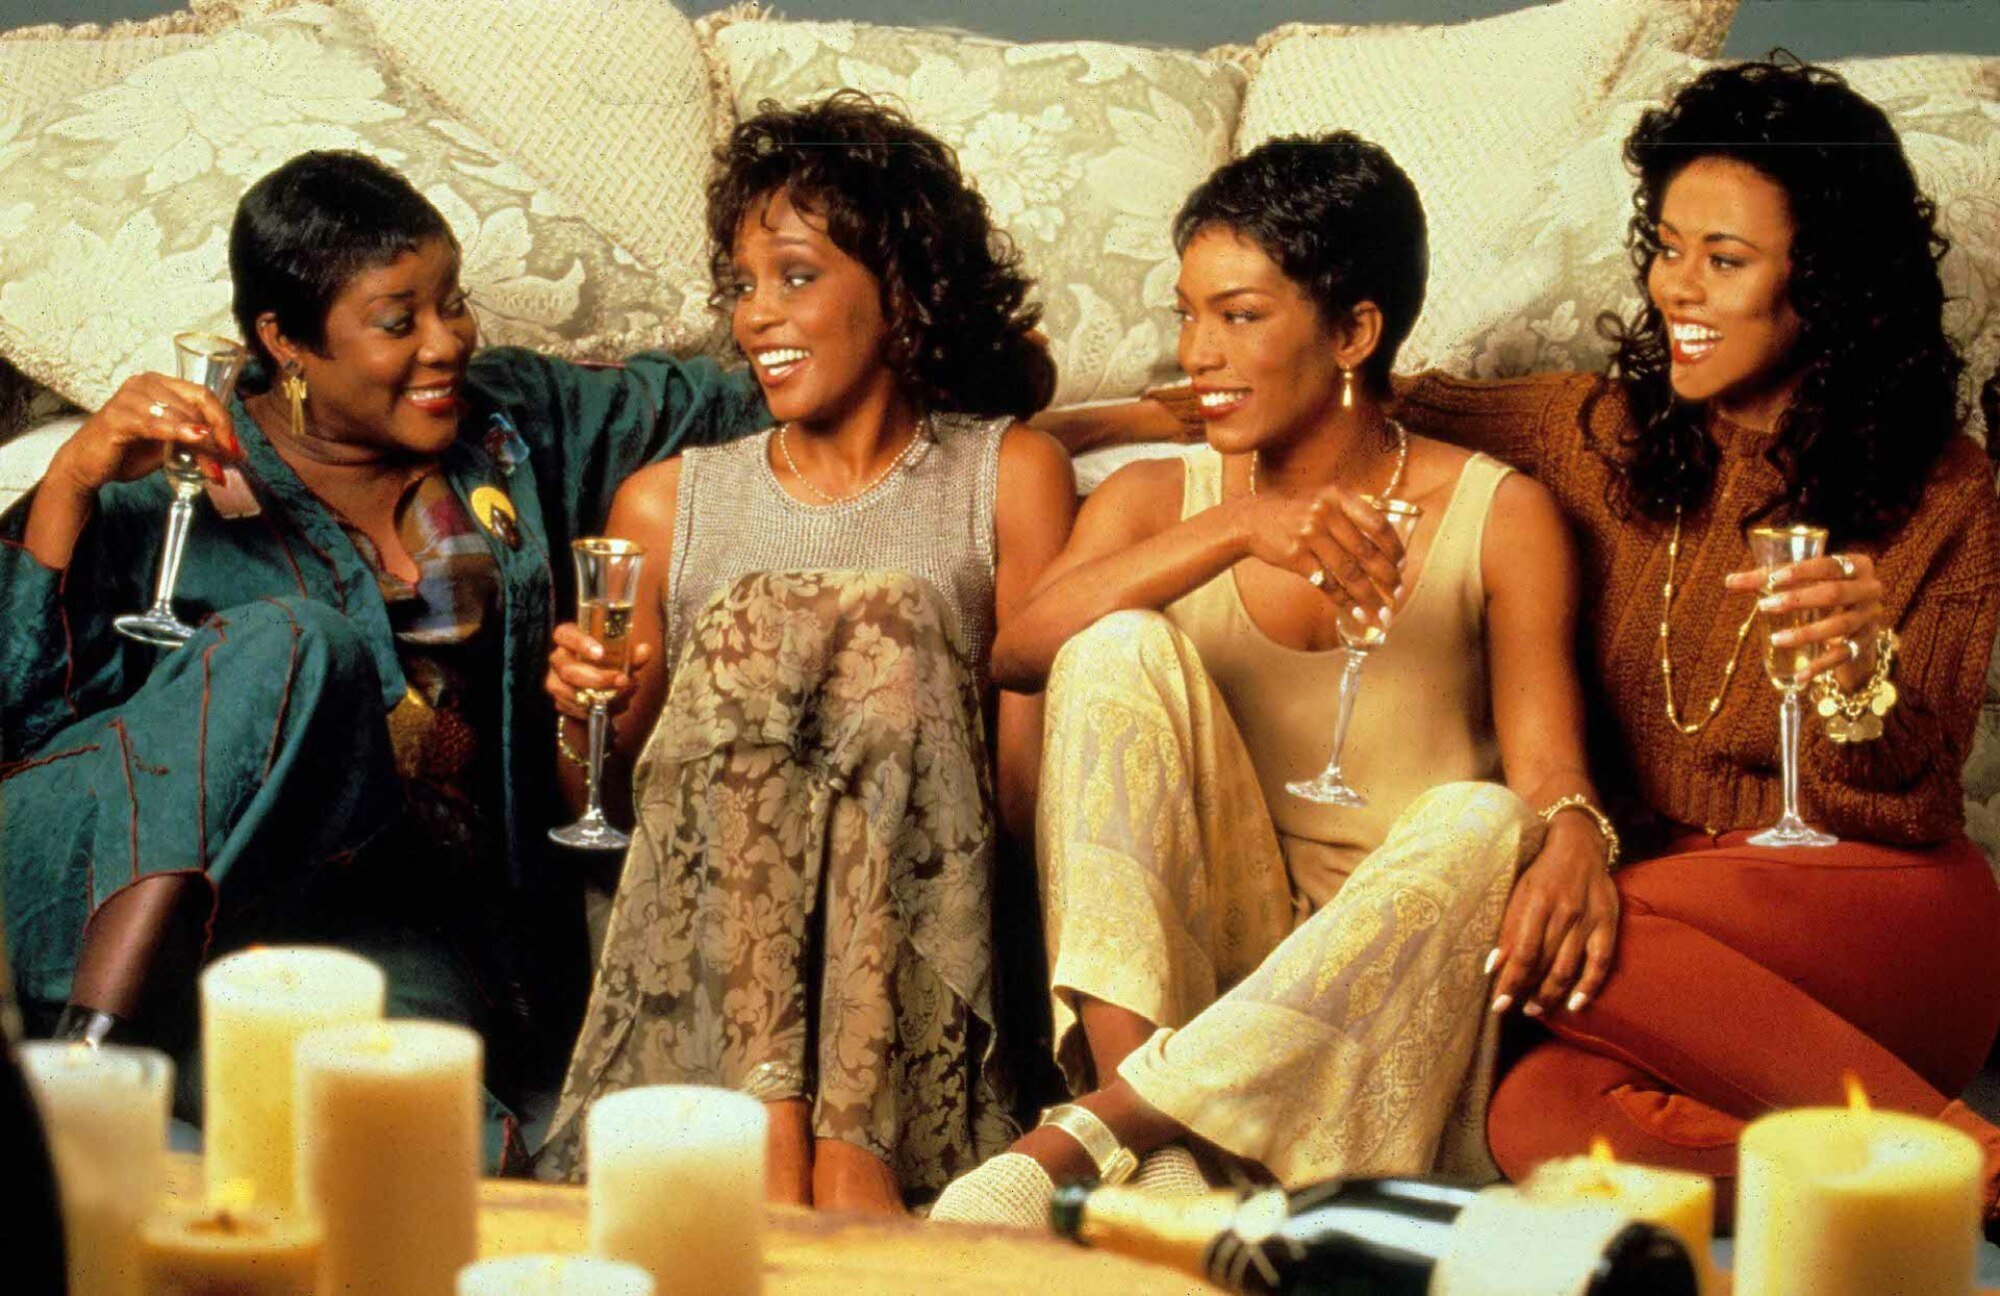 Four Black women sit on a couch holding wine and looking at each other in "Waiting to Exhale."